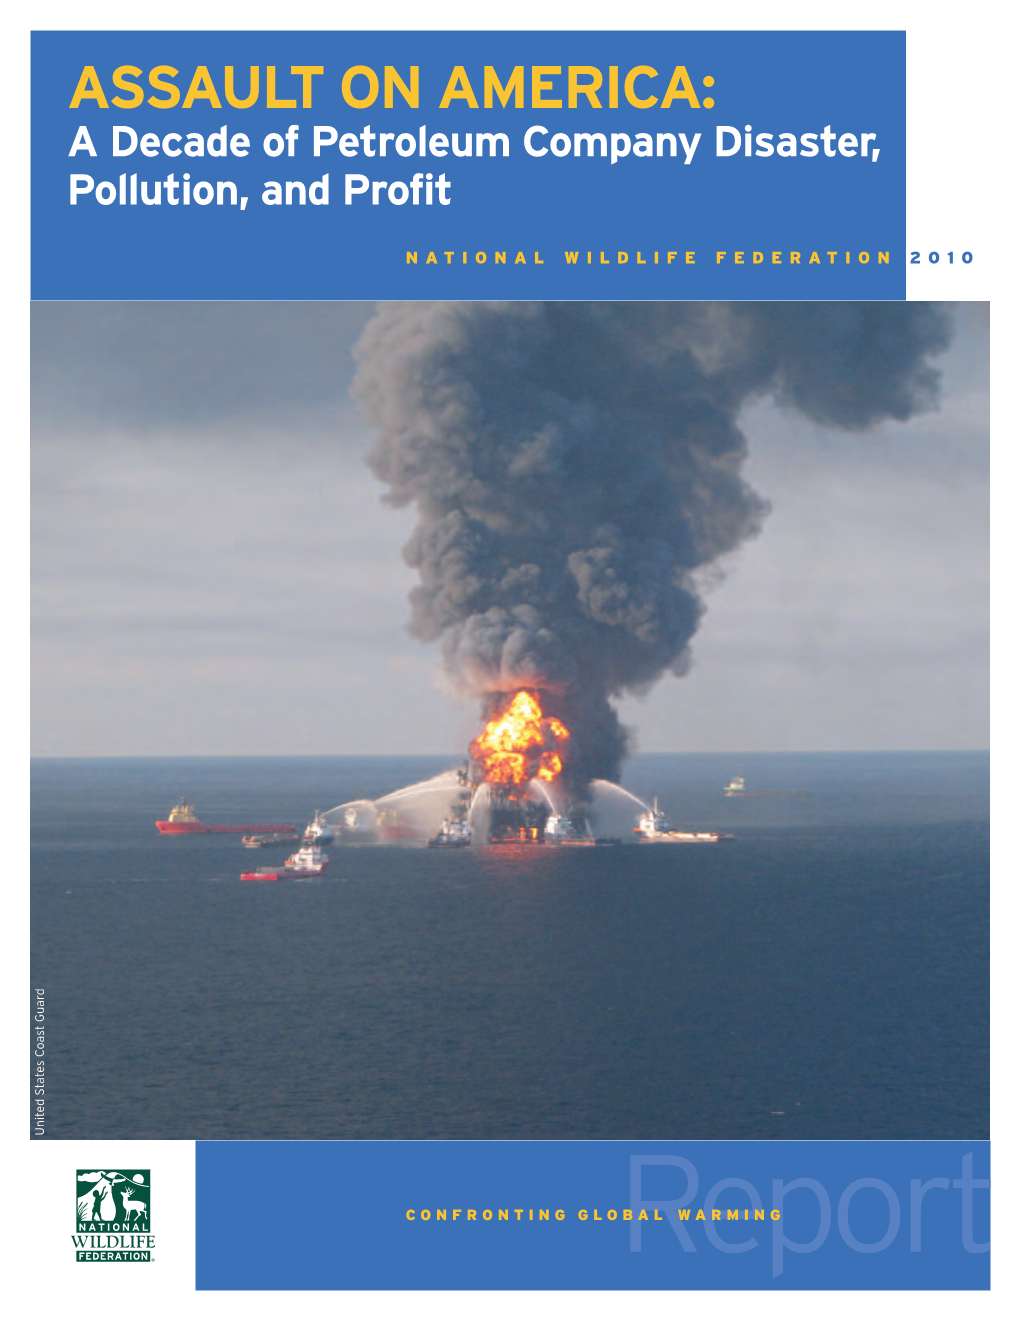 ASSAULT on AMERICA: a Decade of Petroleum Company Disaster, Pollution, and Profit